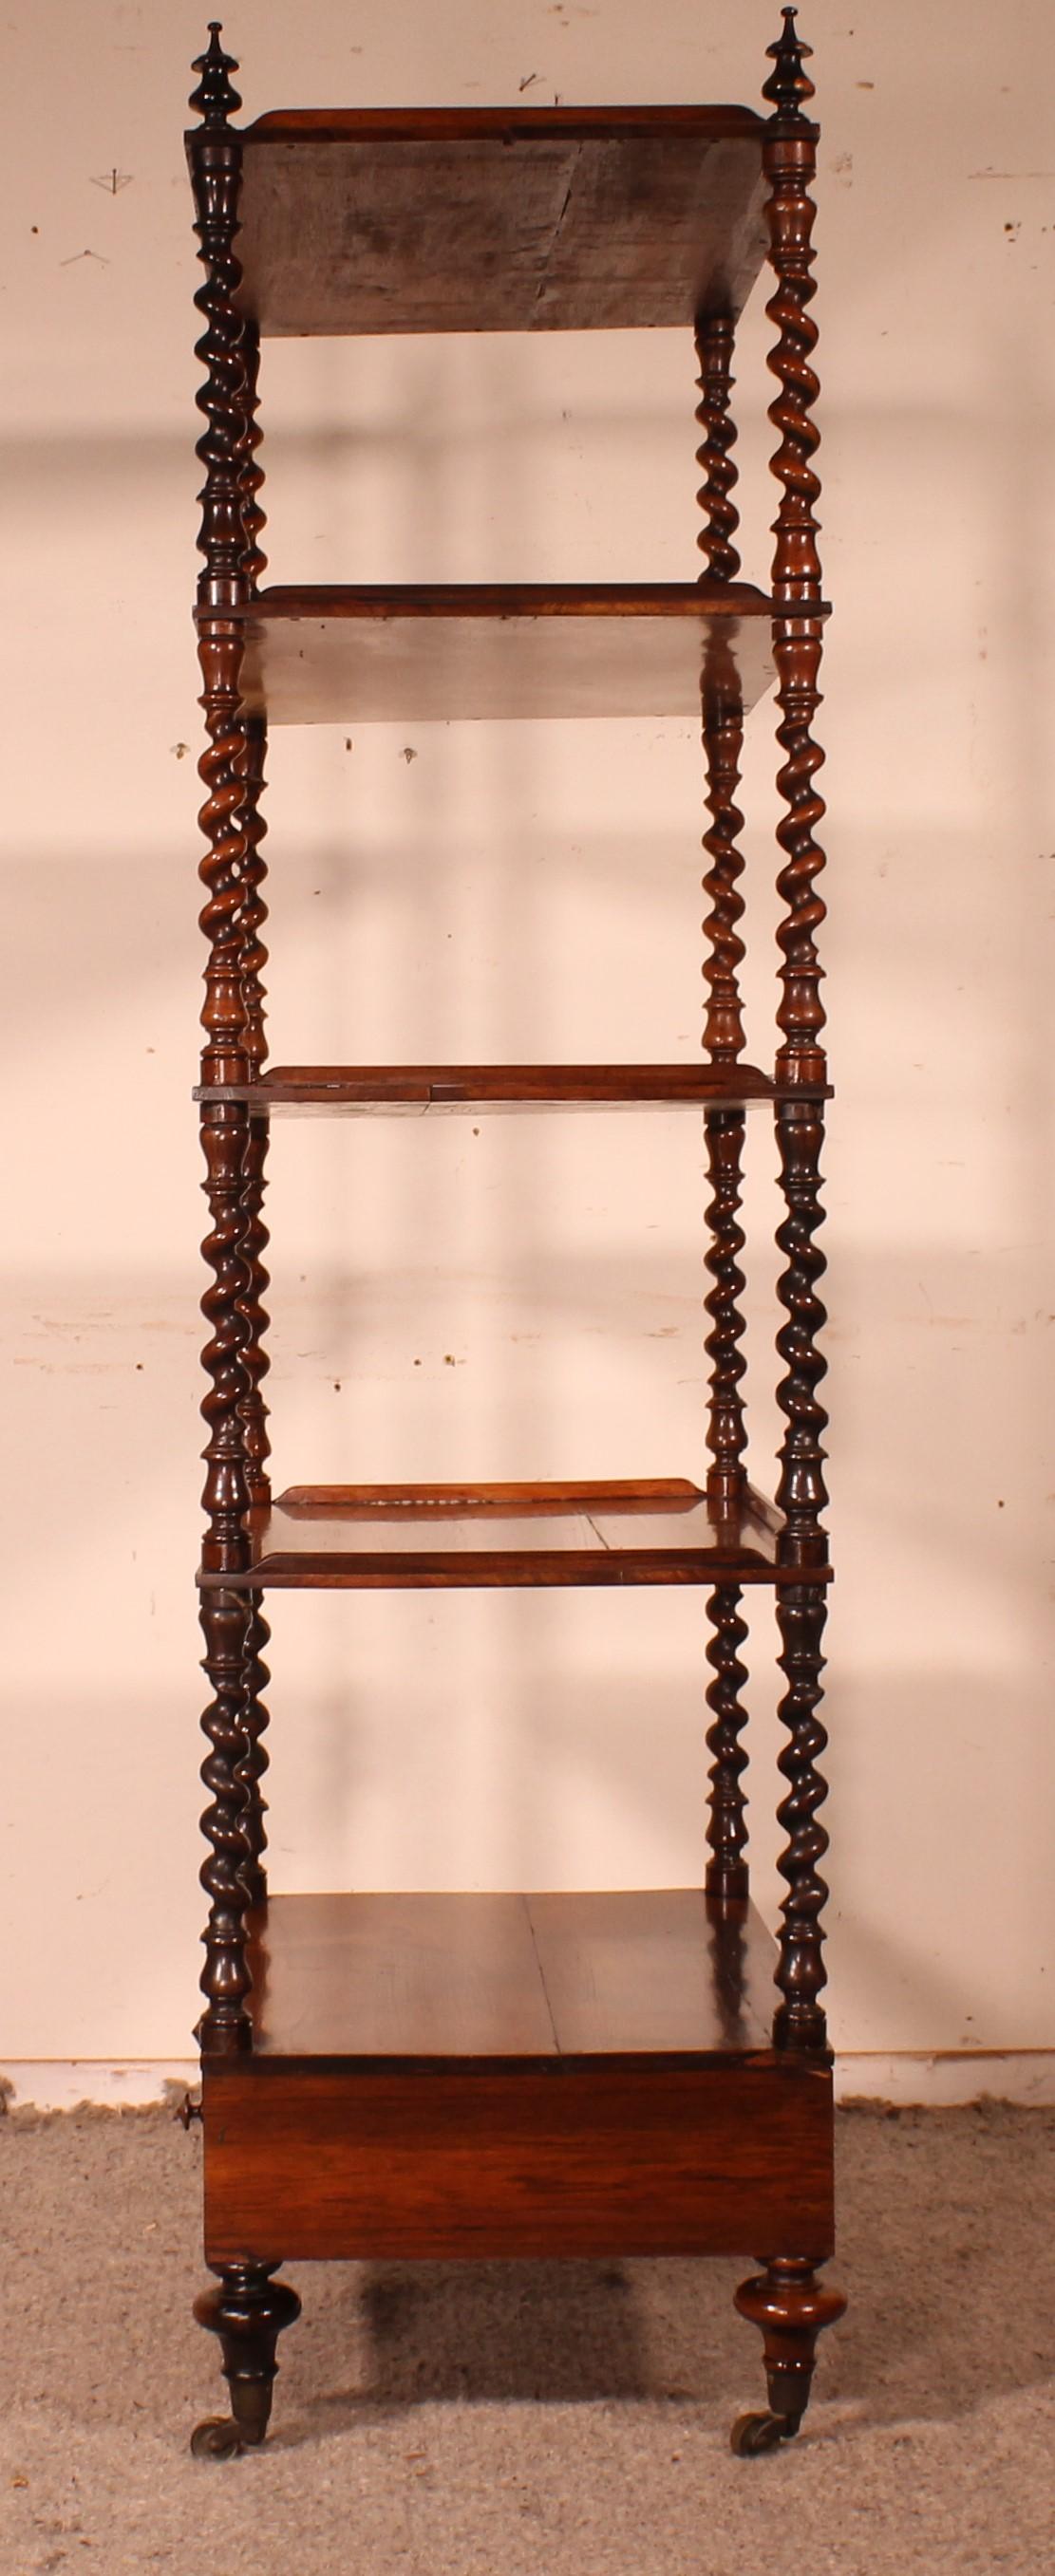 Rosewood Whatnot or Shelf from 19th Century, England 8